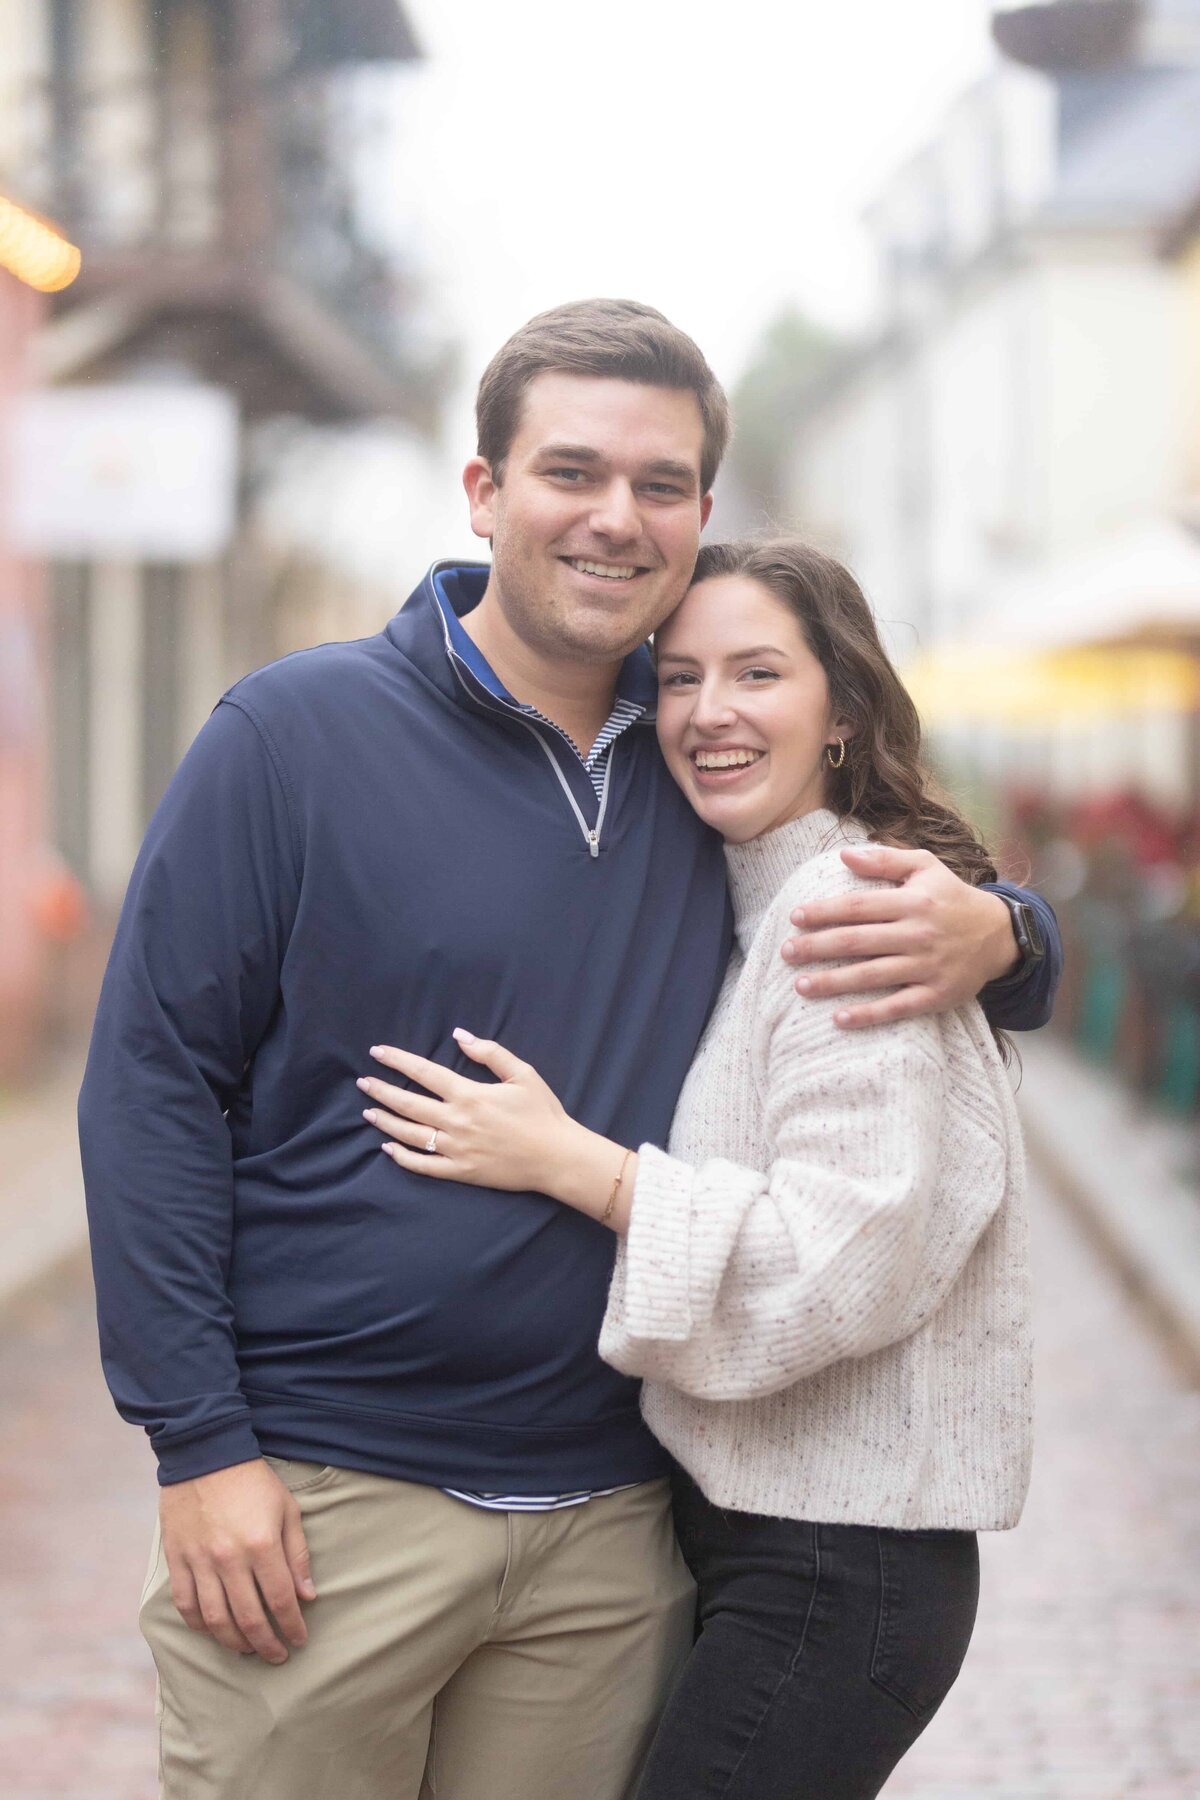 Surprise Proposal Photography in St. Augustine Florida | Proposal Photographers St Augustine Florida